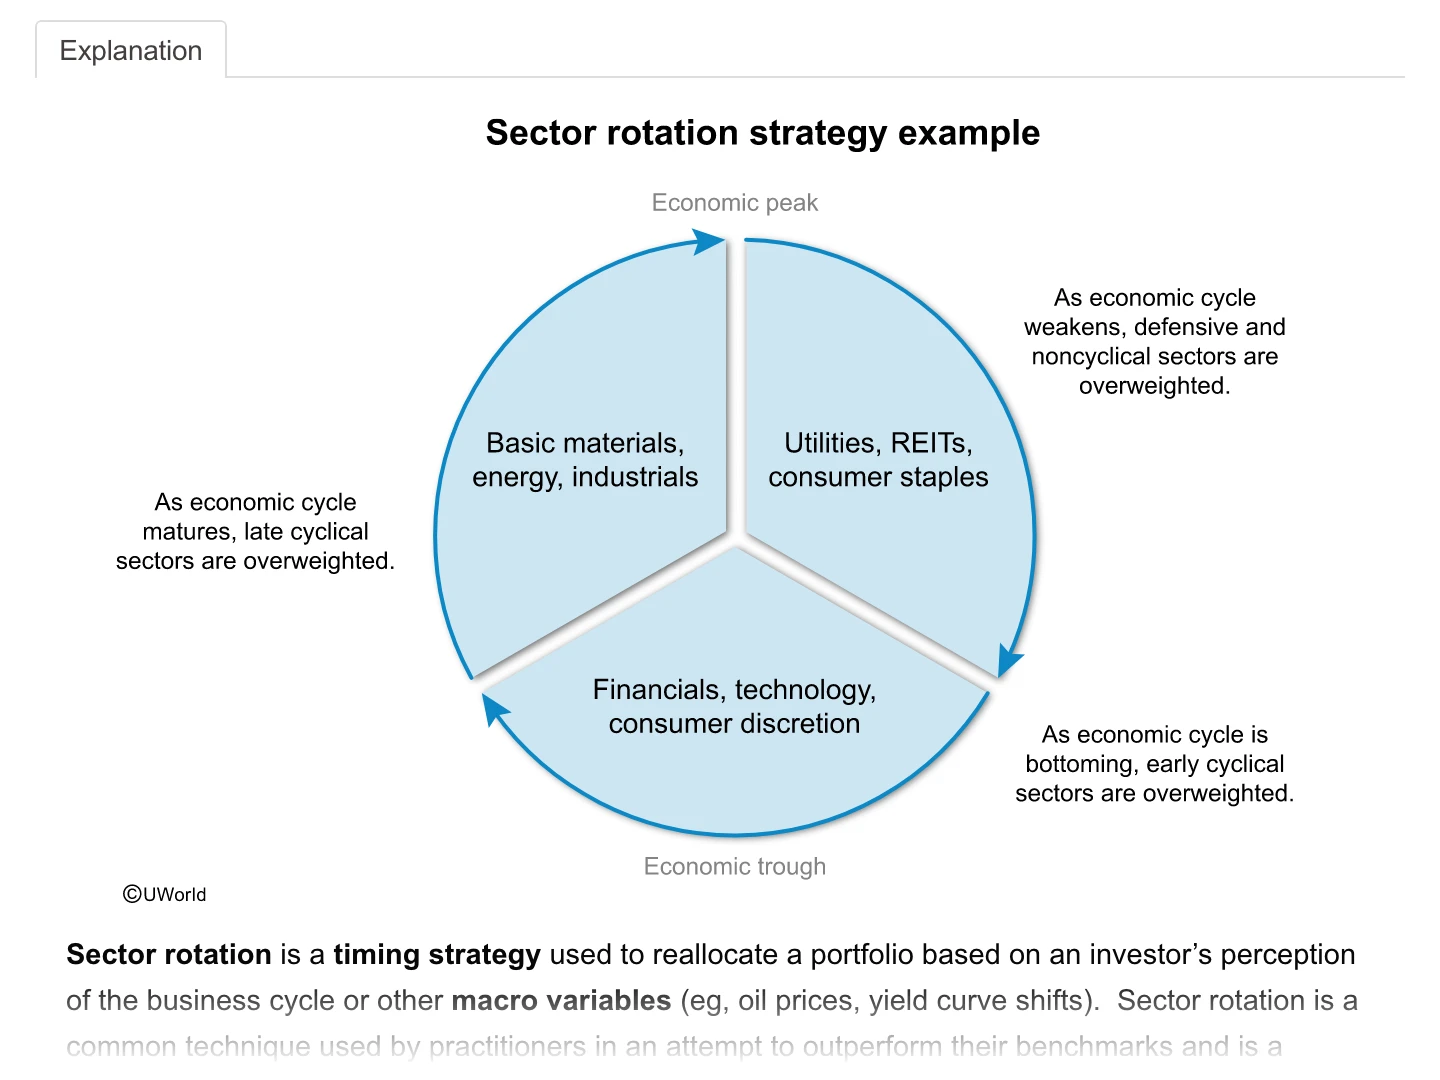 The image depicts Sector rotation strategy example